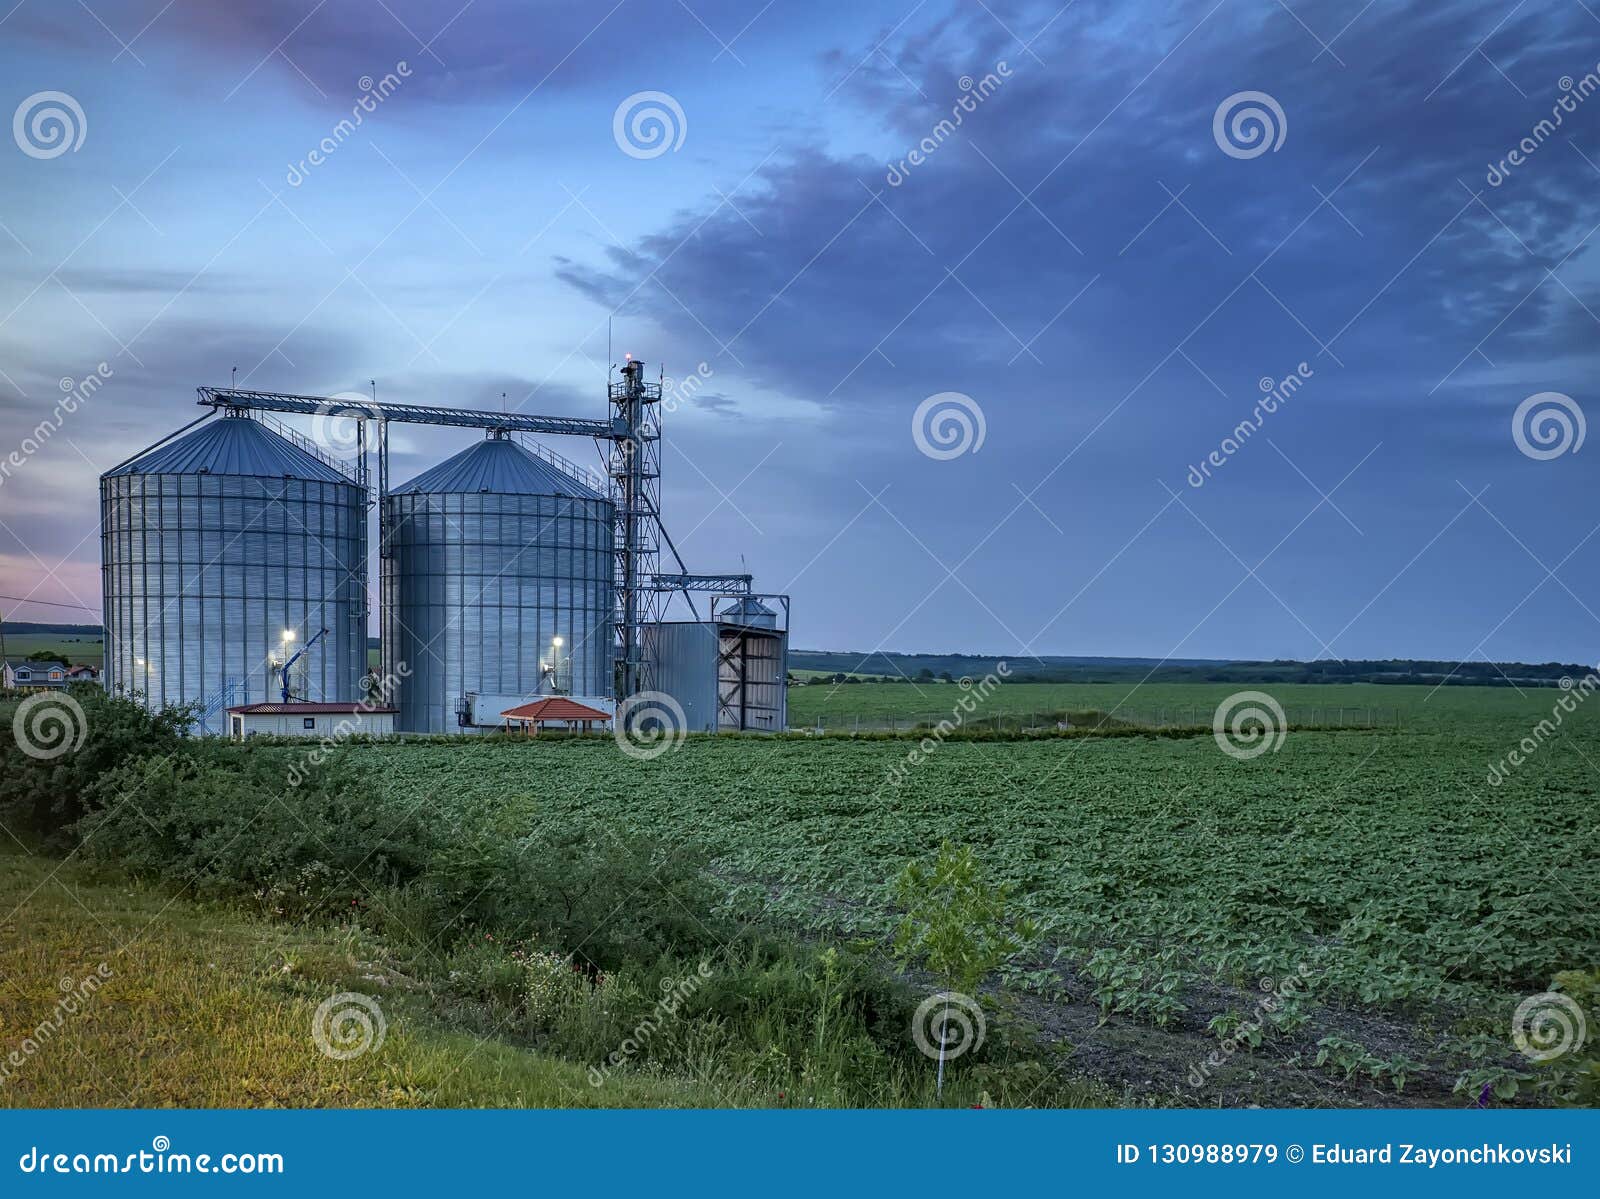 modern agricultural silo.